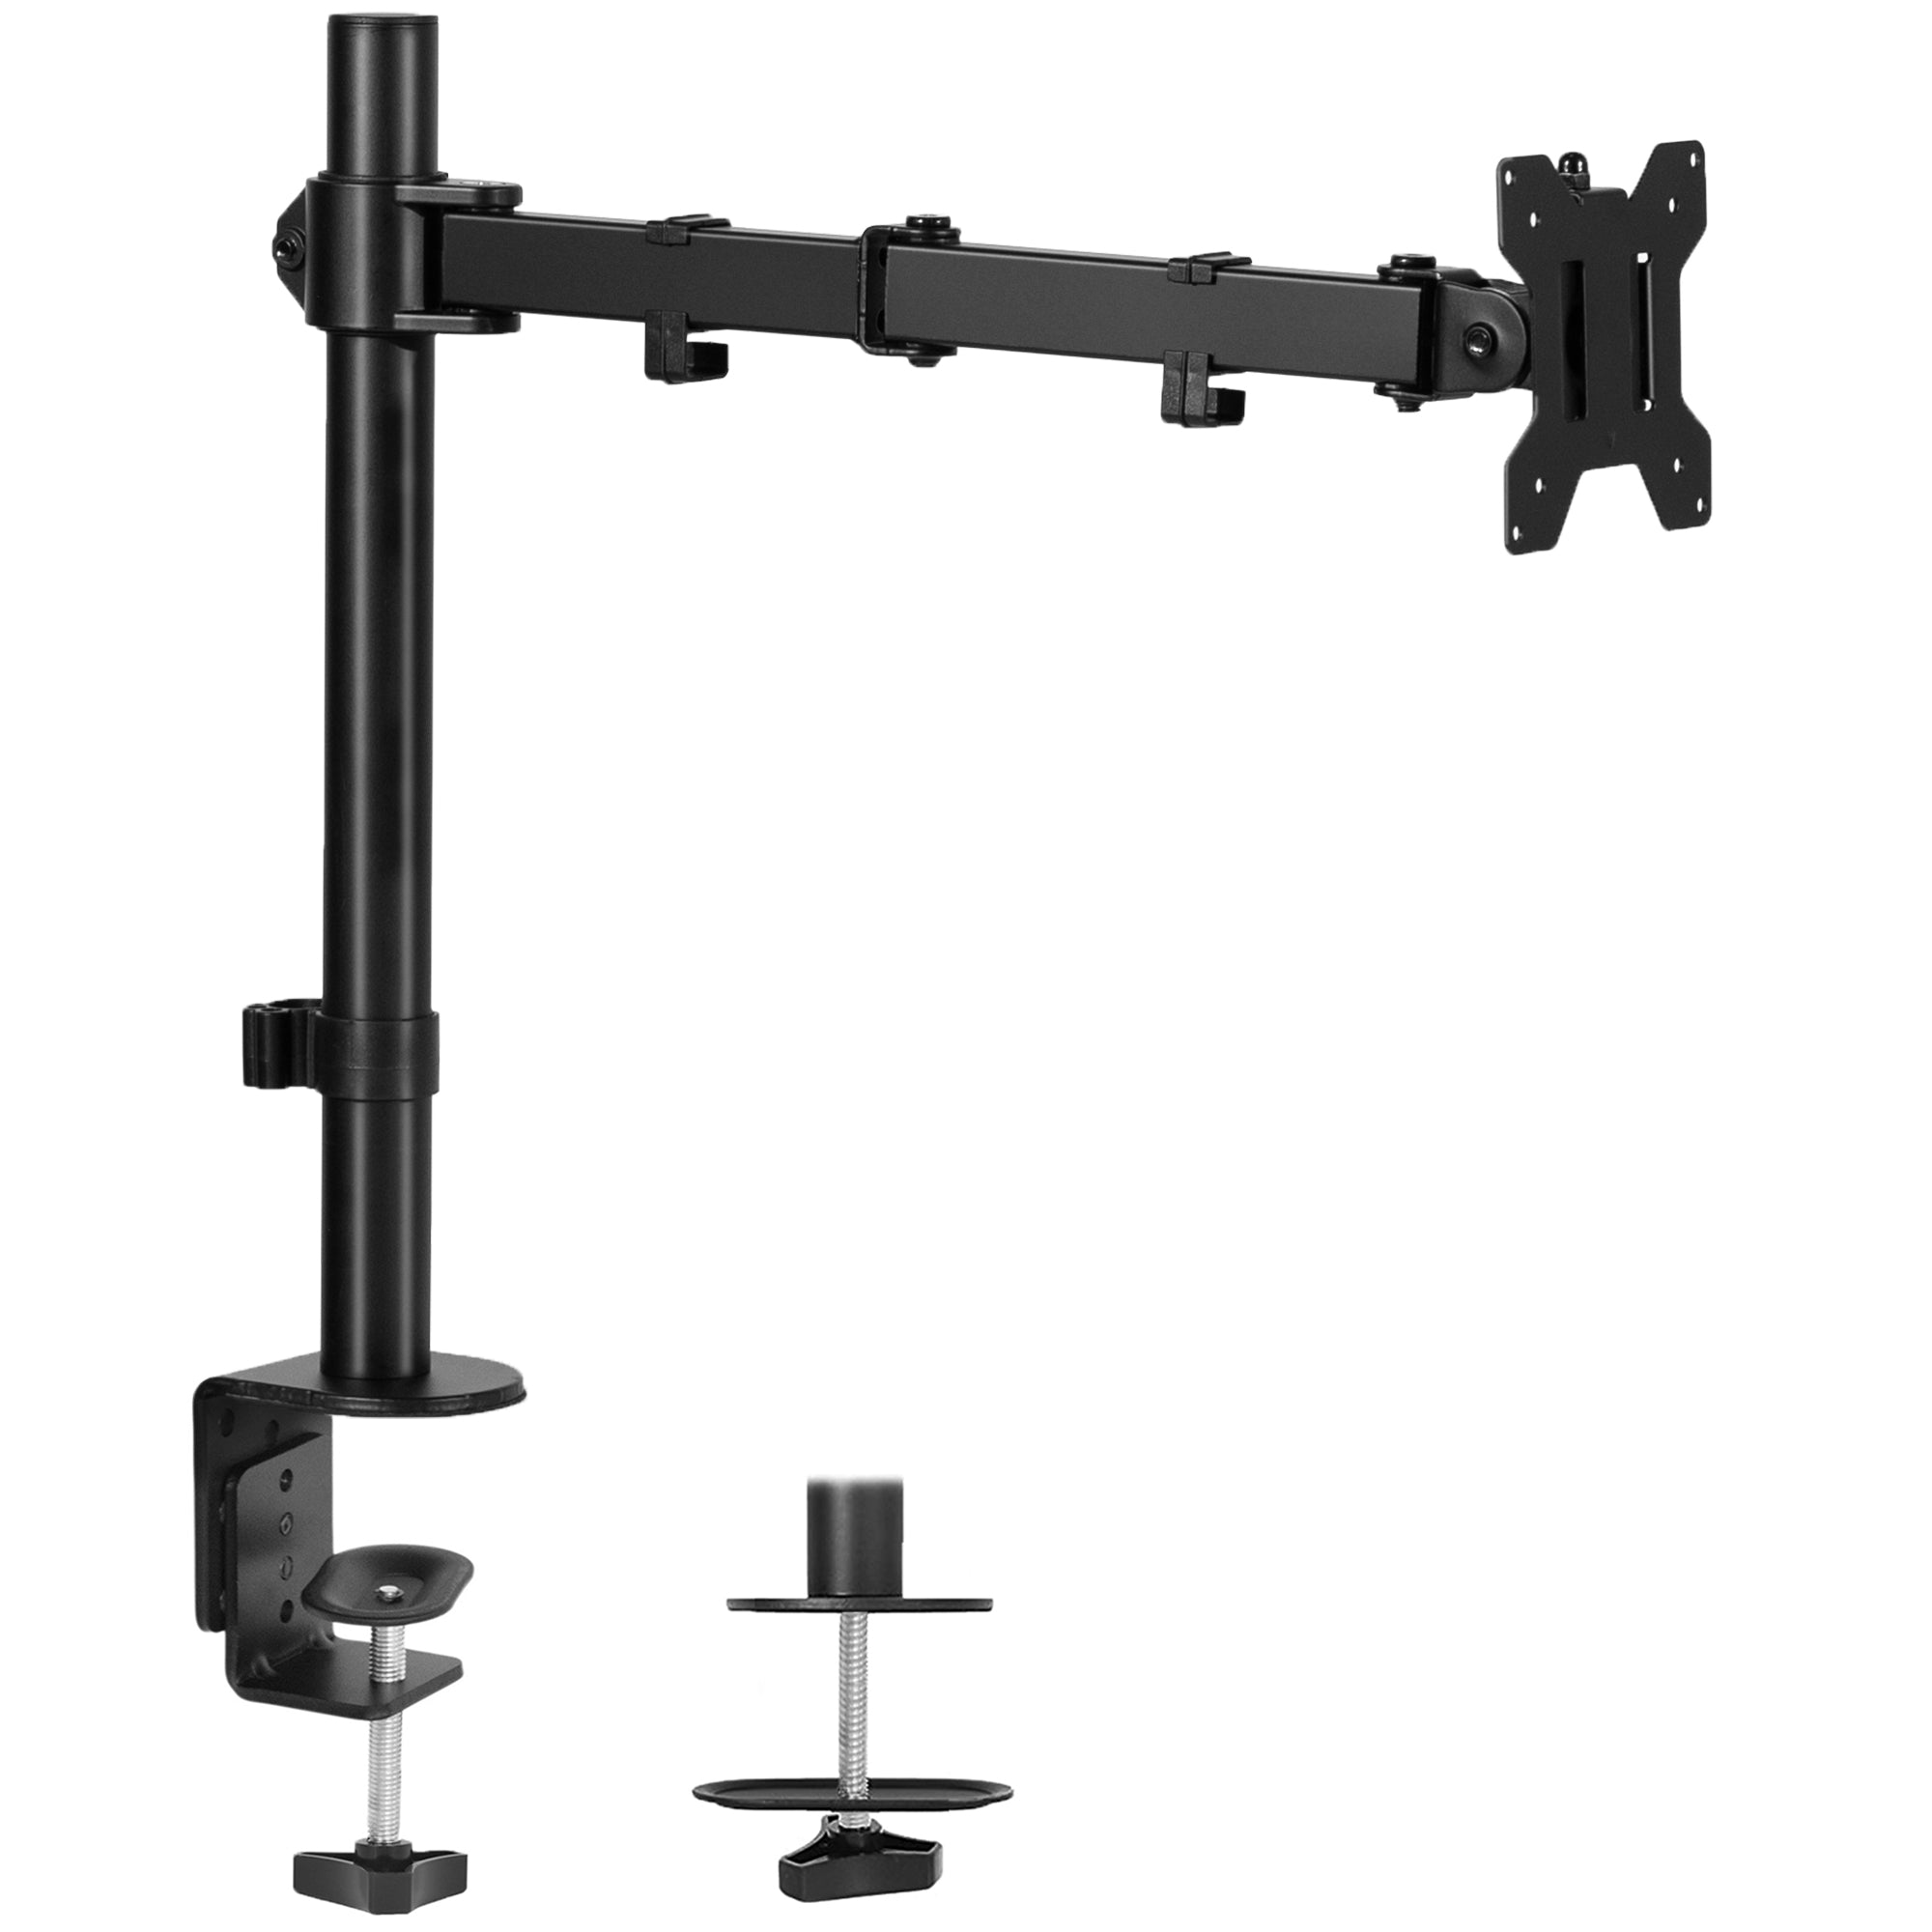 Single Monitor Desk Mount – VIVO desk solutions, screen mounting, and more